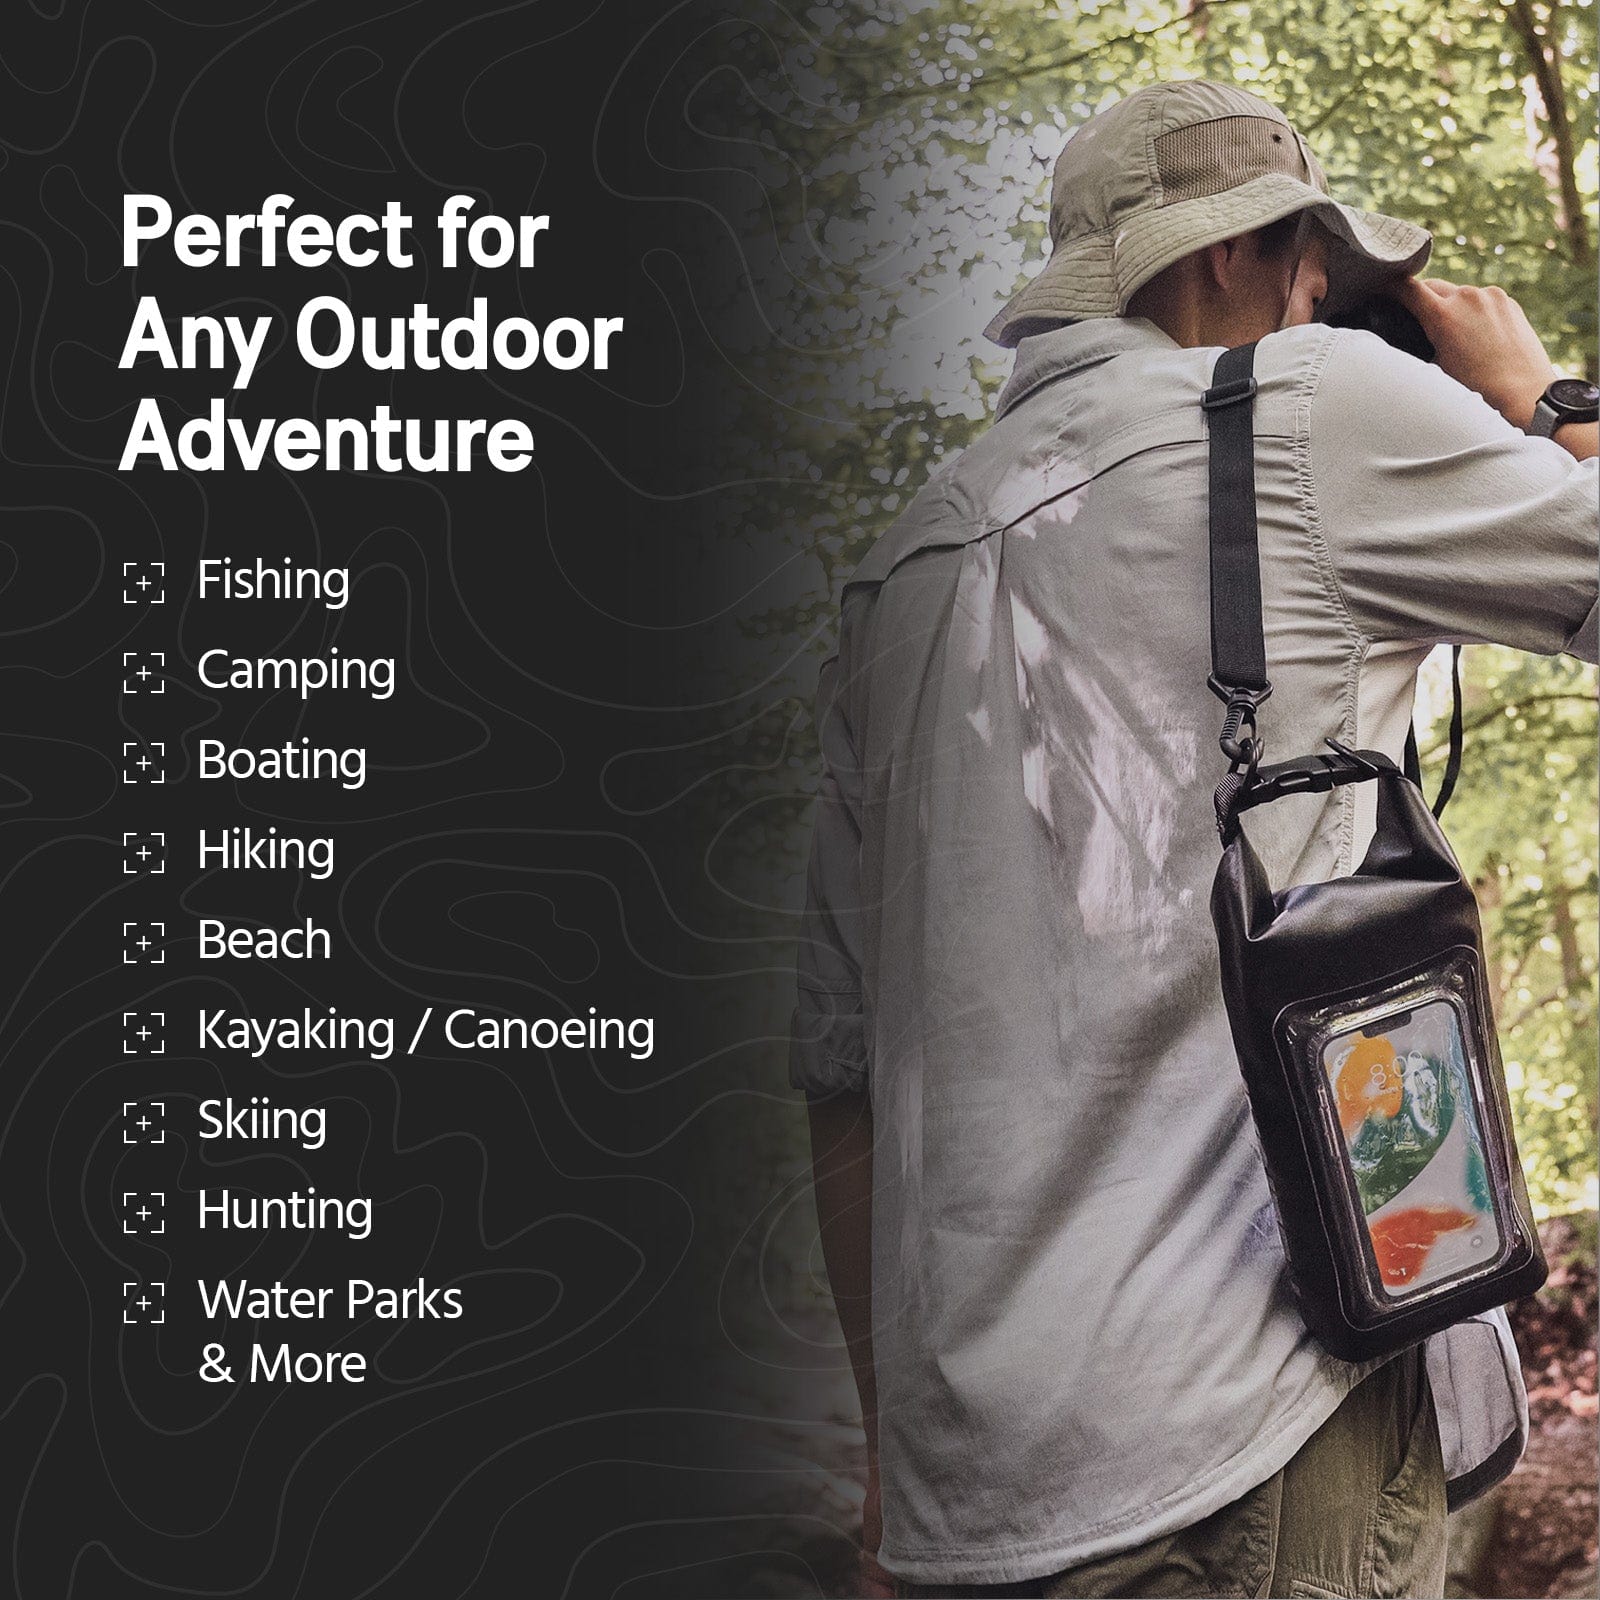 Perfect for any outdoor adventure: fishing, camping, bating. hiking, beach, kayaking / canoeing, skiing, hunting, water parks, and more!